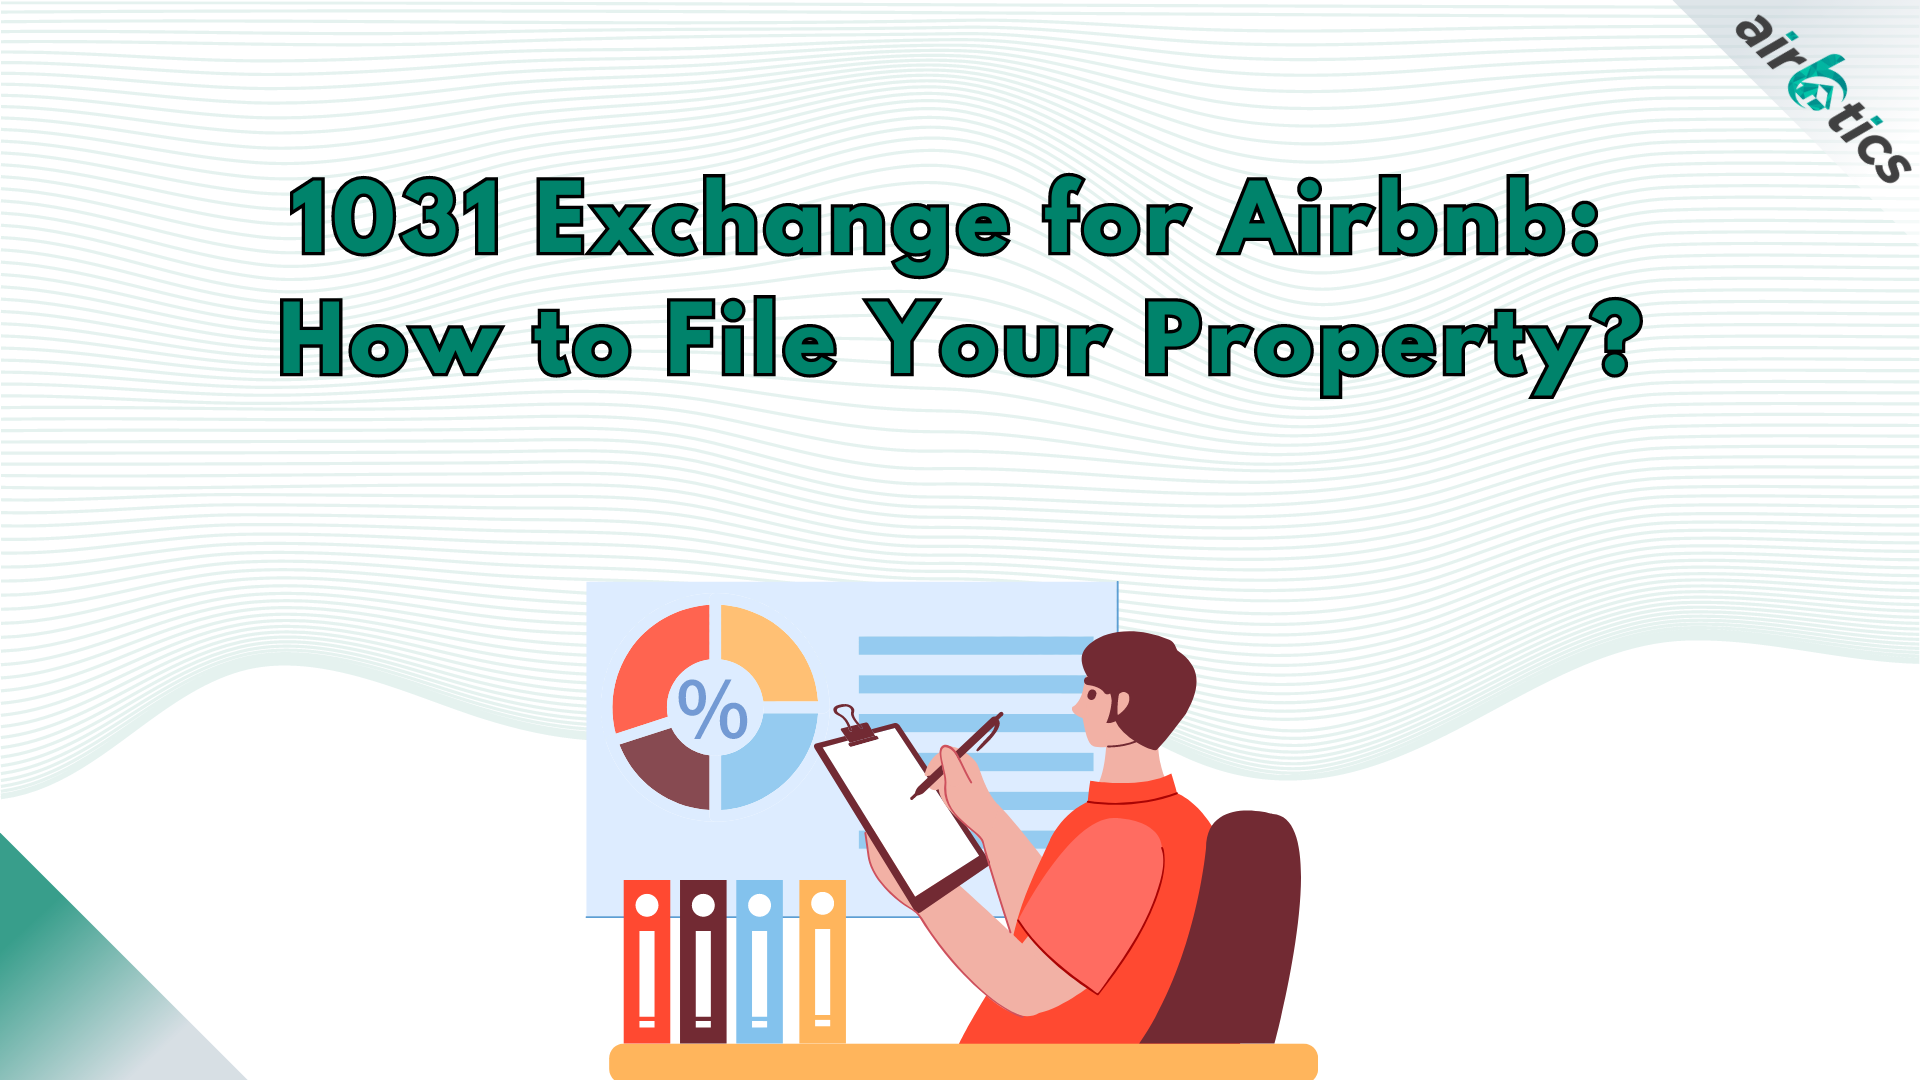 1031 exchange for airbnb